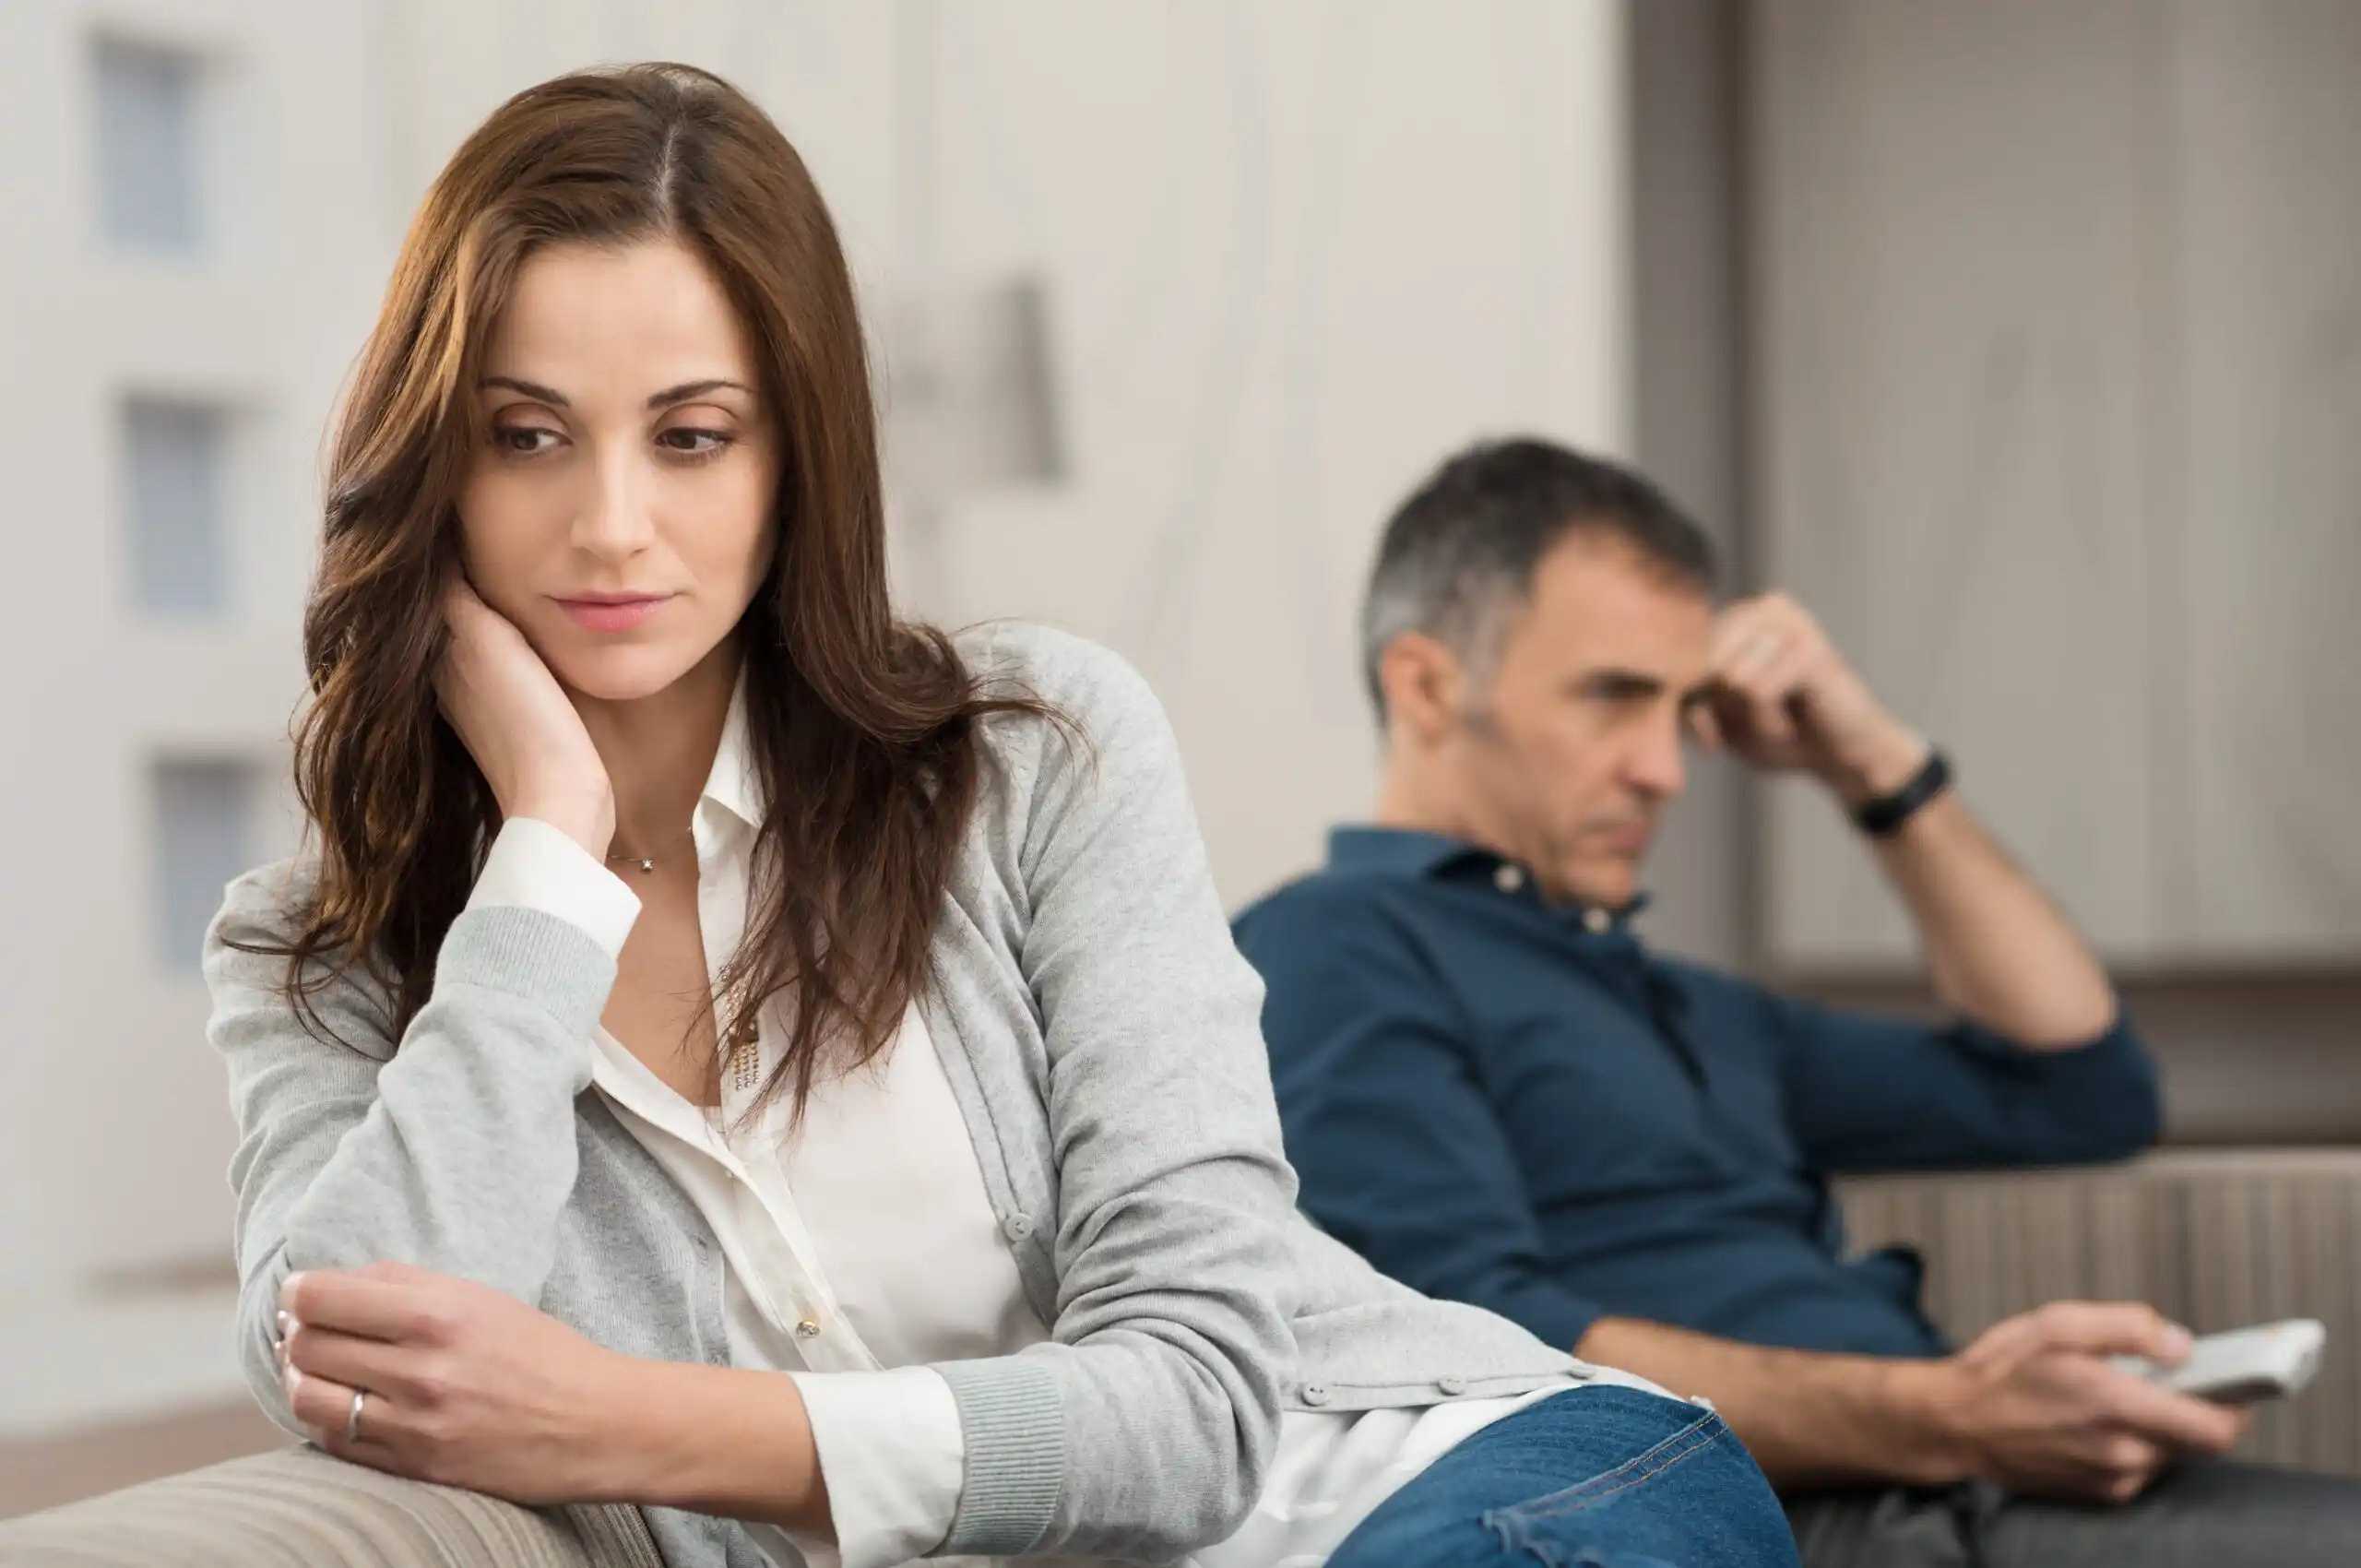 Separated Couple in Deep Thought About Tax Implications